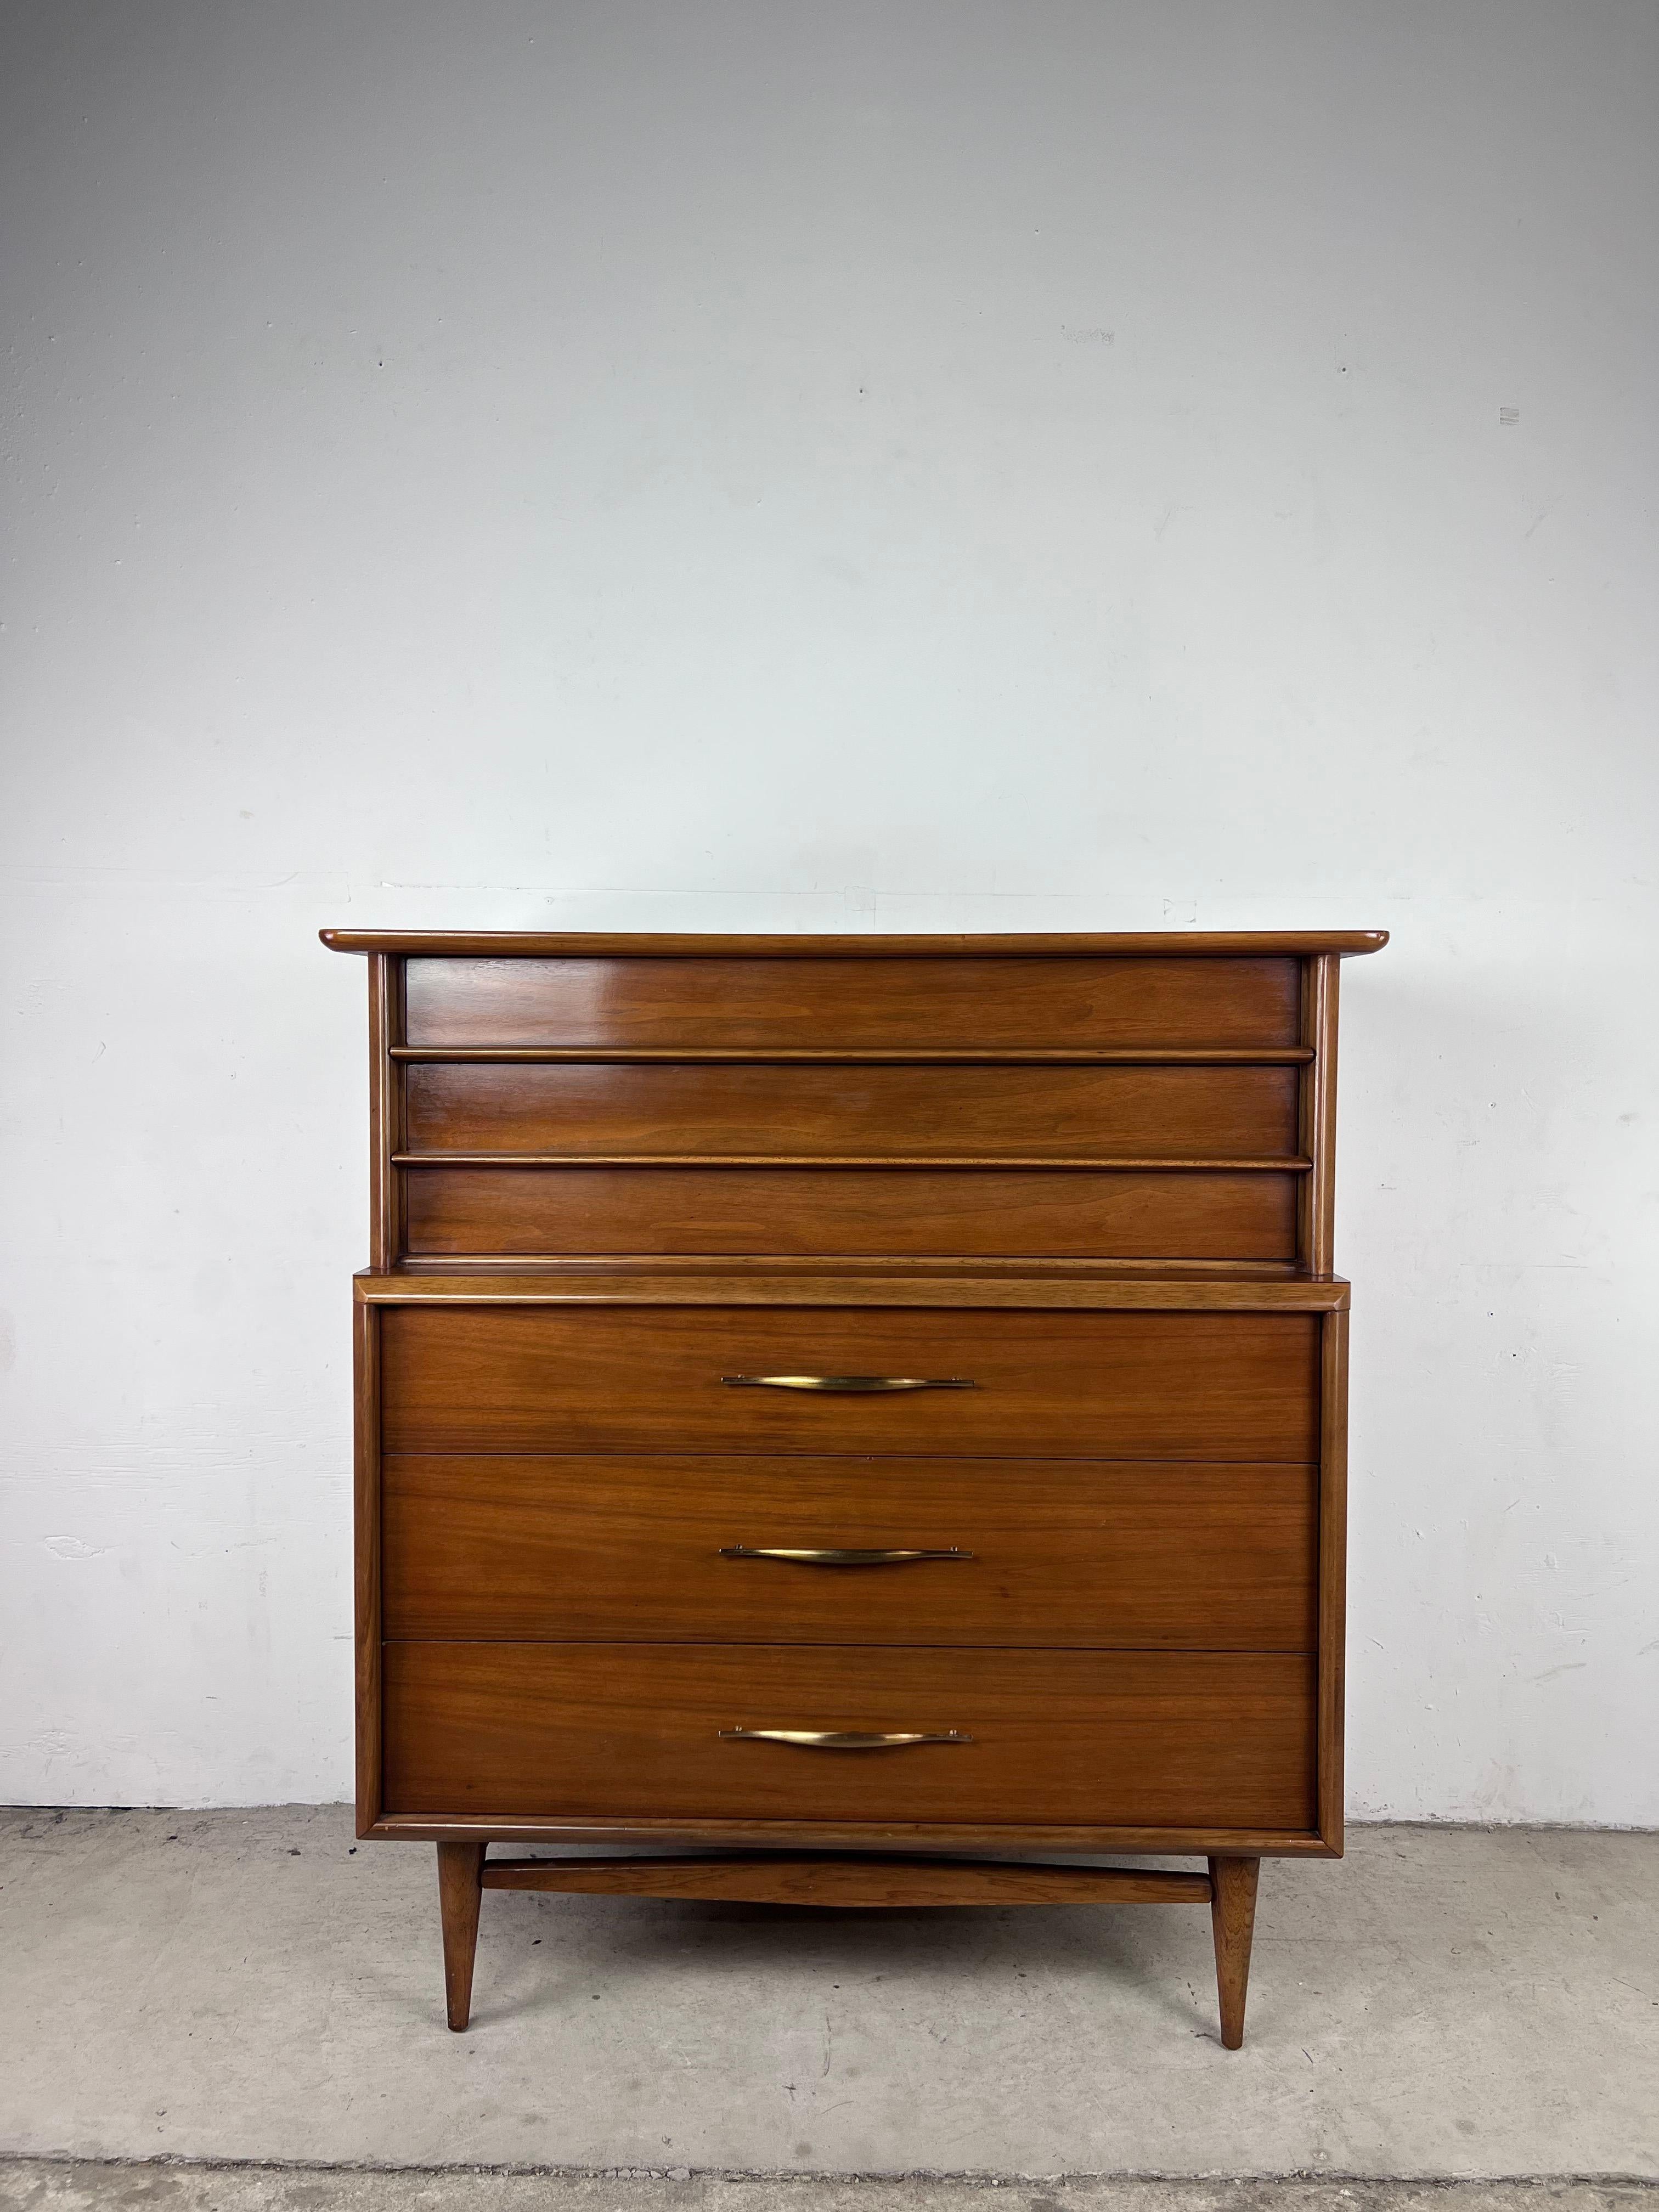 This mid century modern highboy dresser from the 